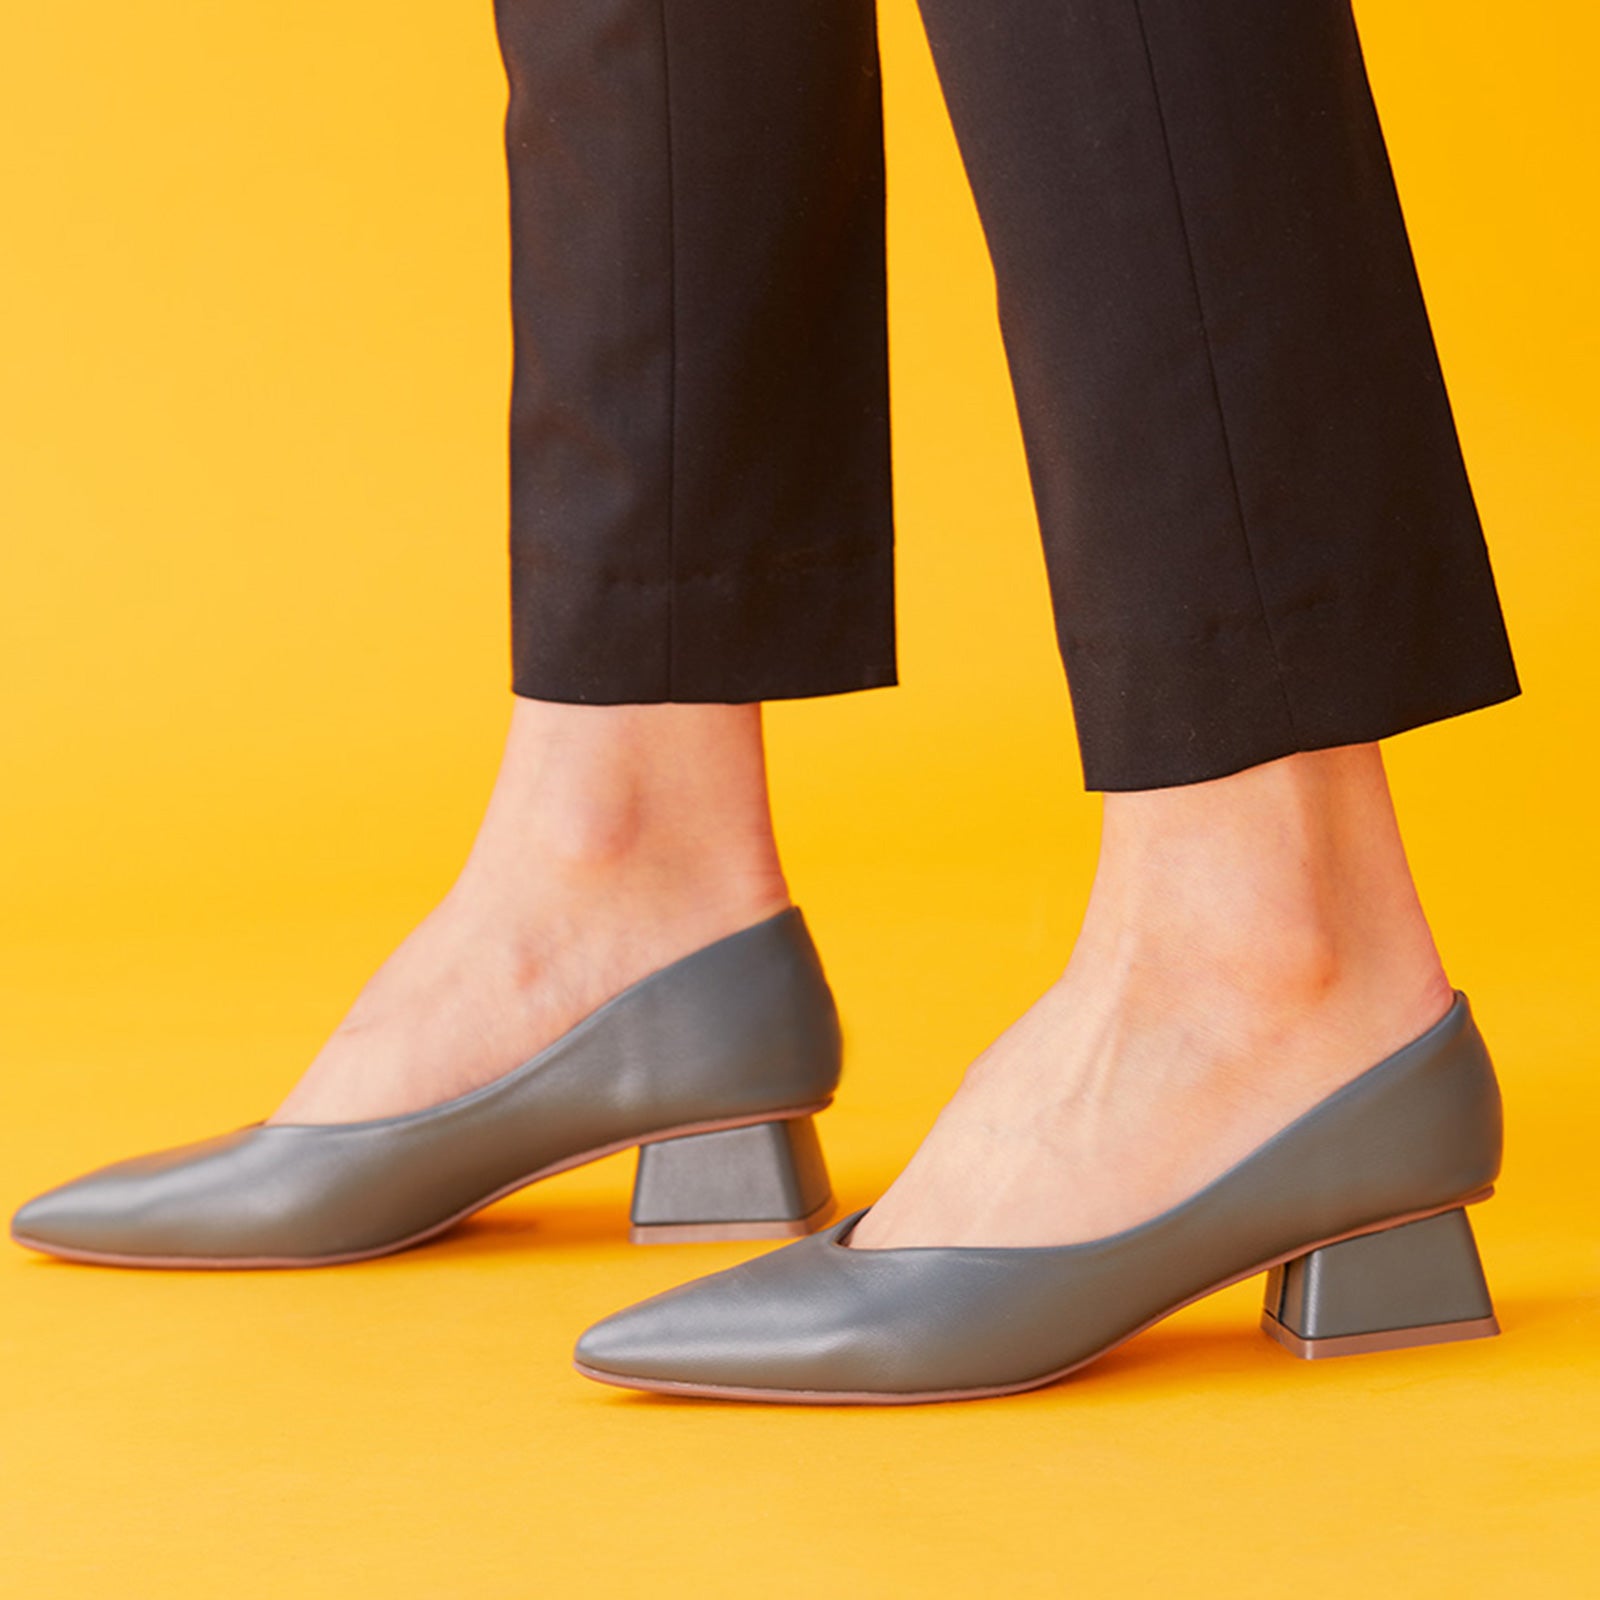 Embrace versatile and stylish flair with these blue block heel pumps, featuring a striking color for a timeless and fashionable look